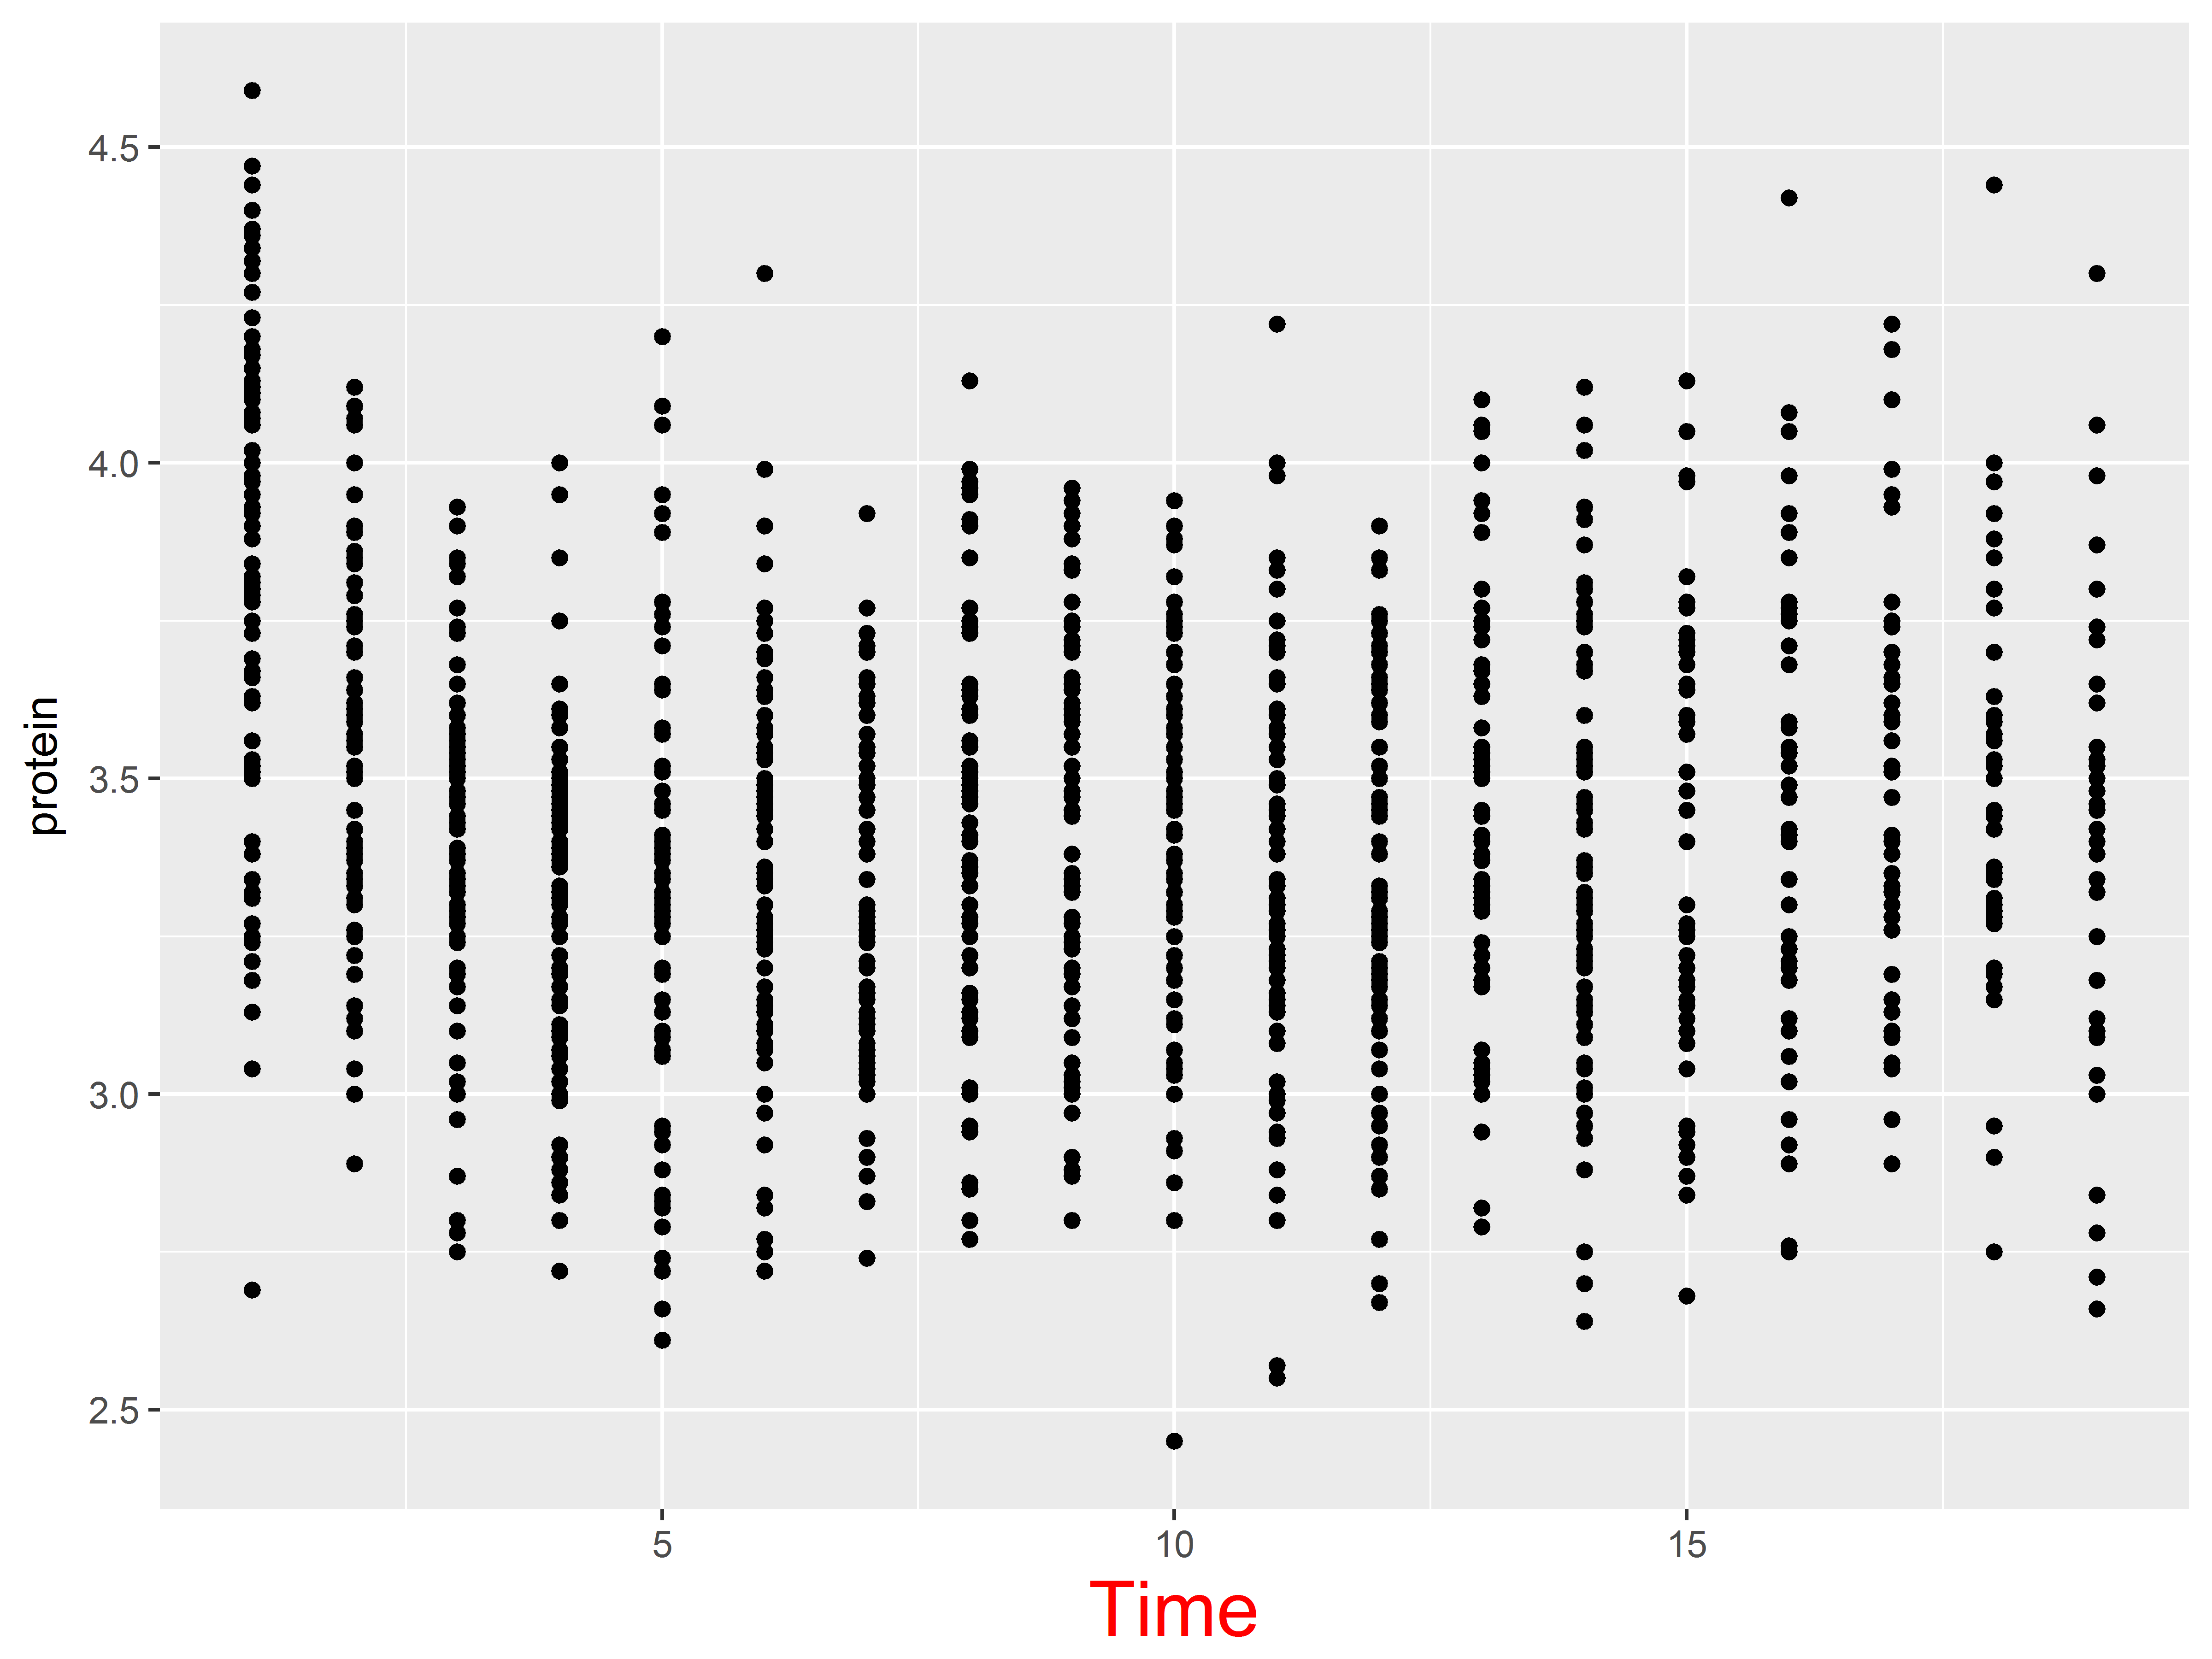 Fig 23b 20pt red x-axis title